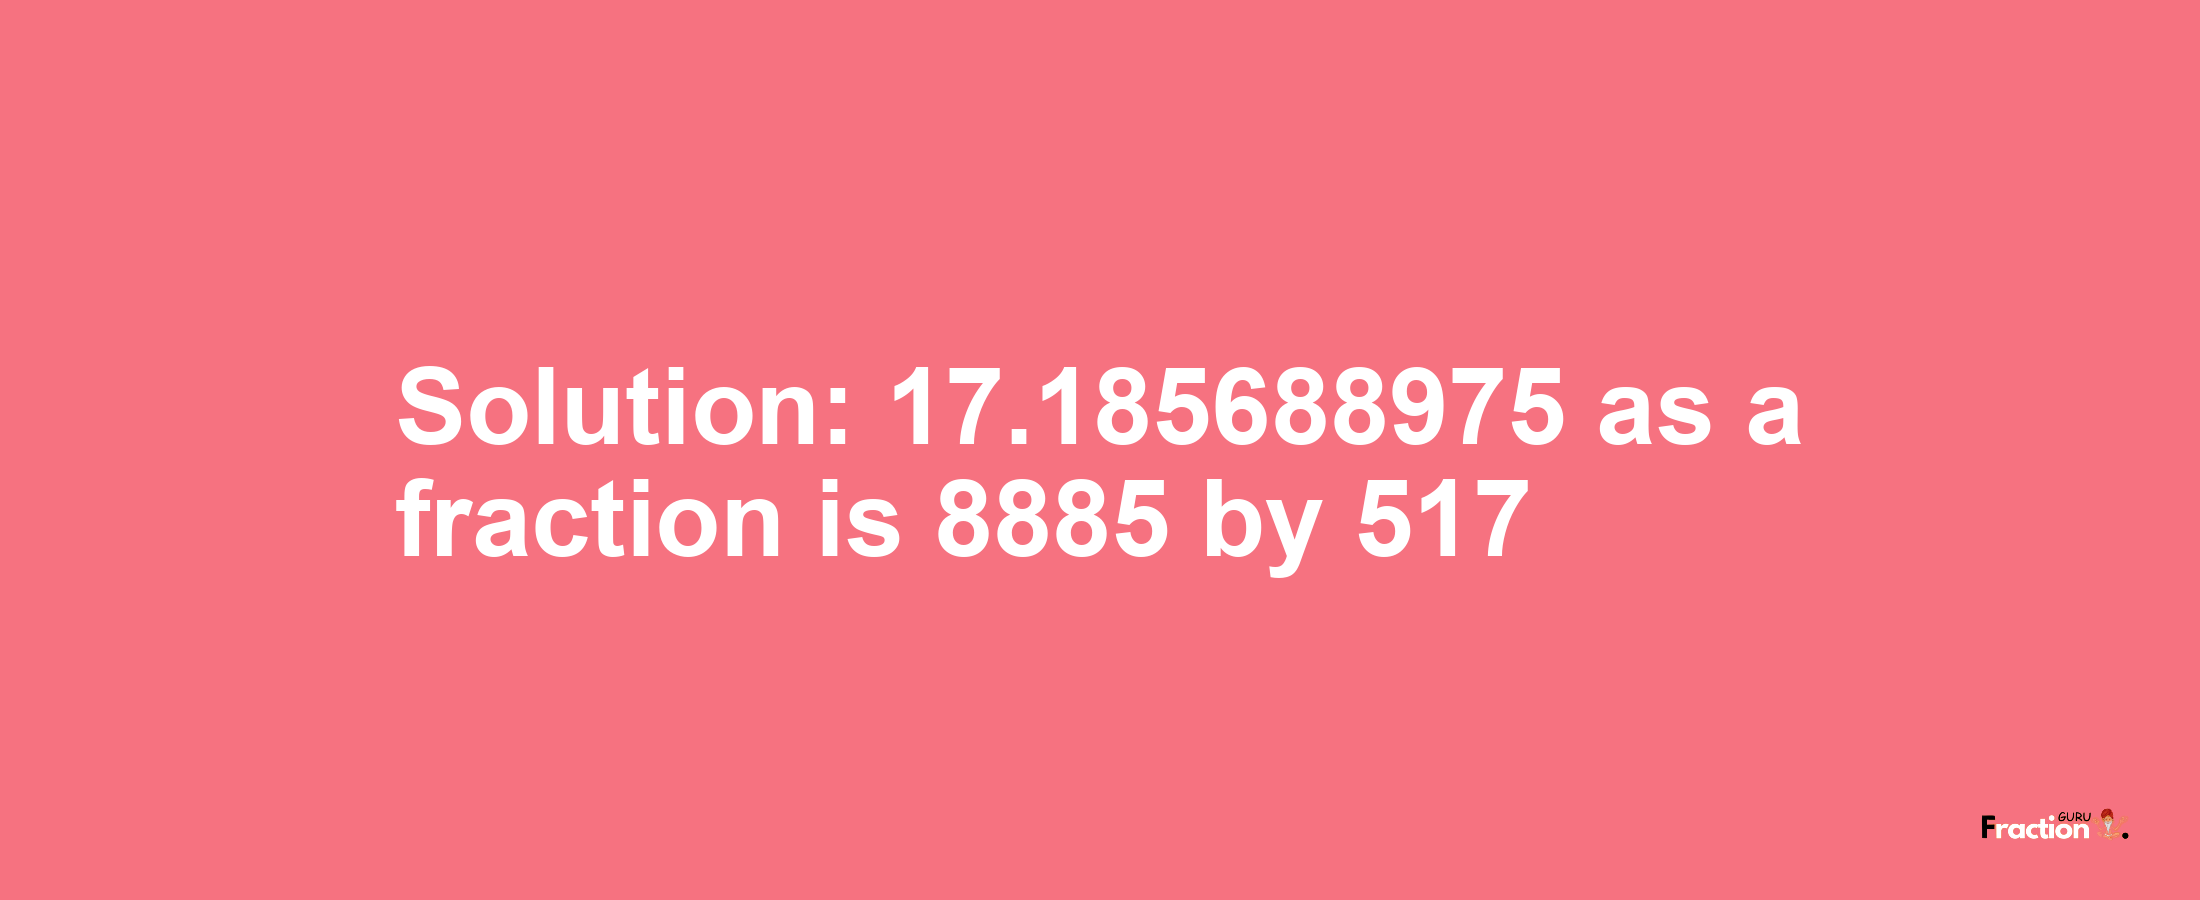 Solution:17.185688975 as a fraction is 8885/517